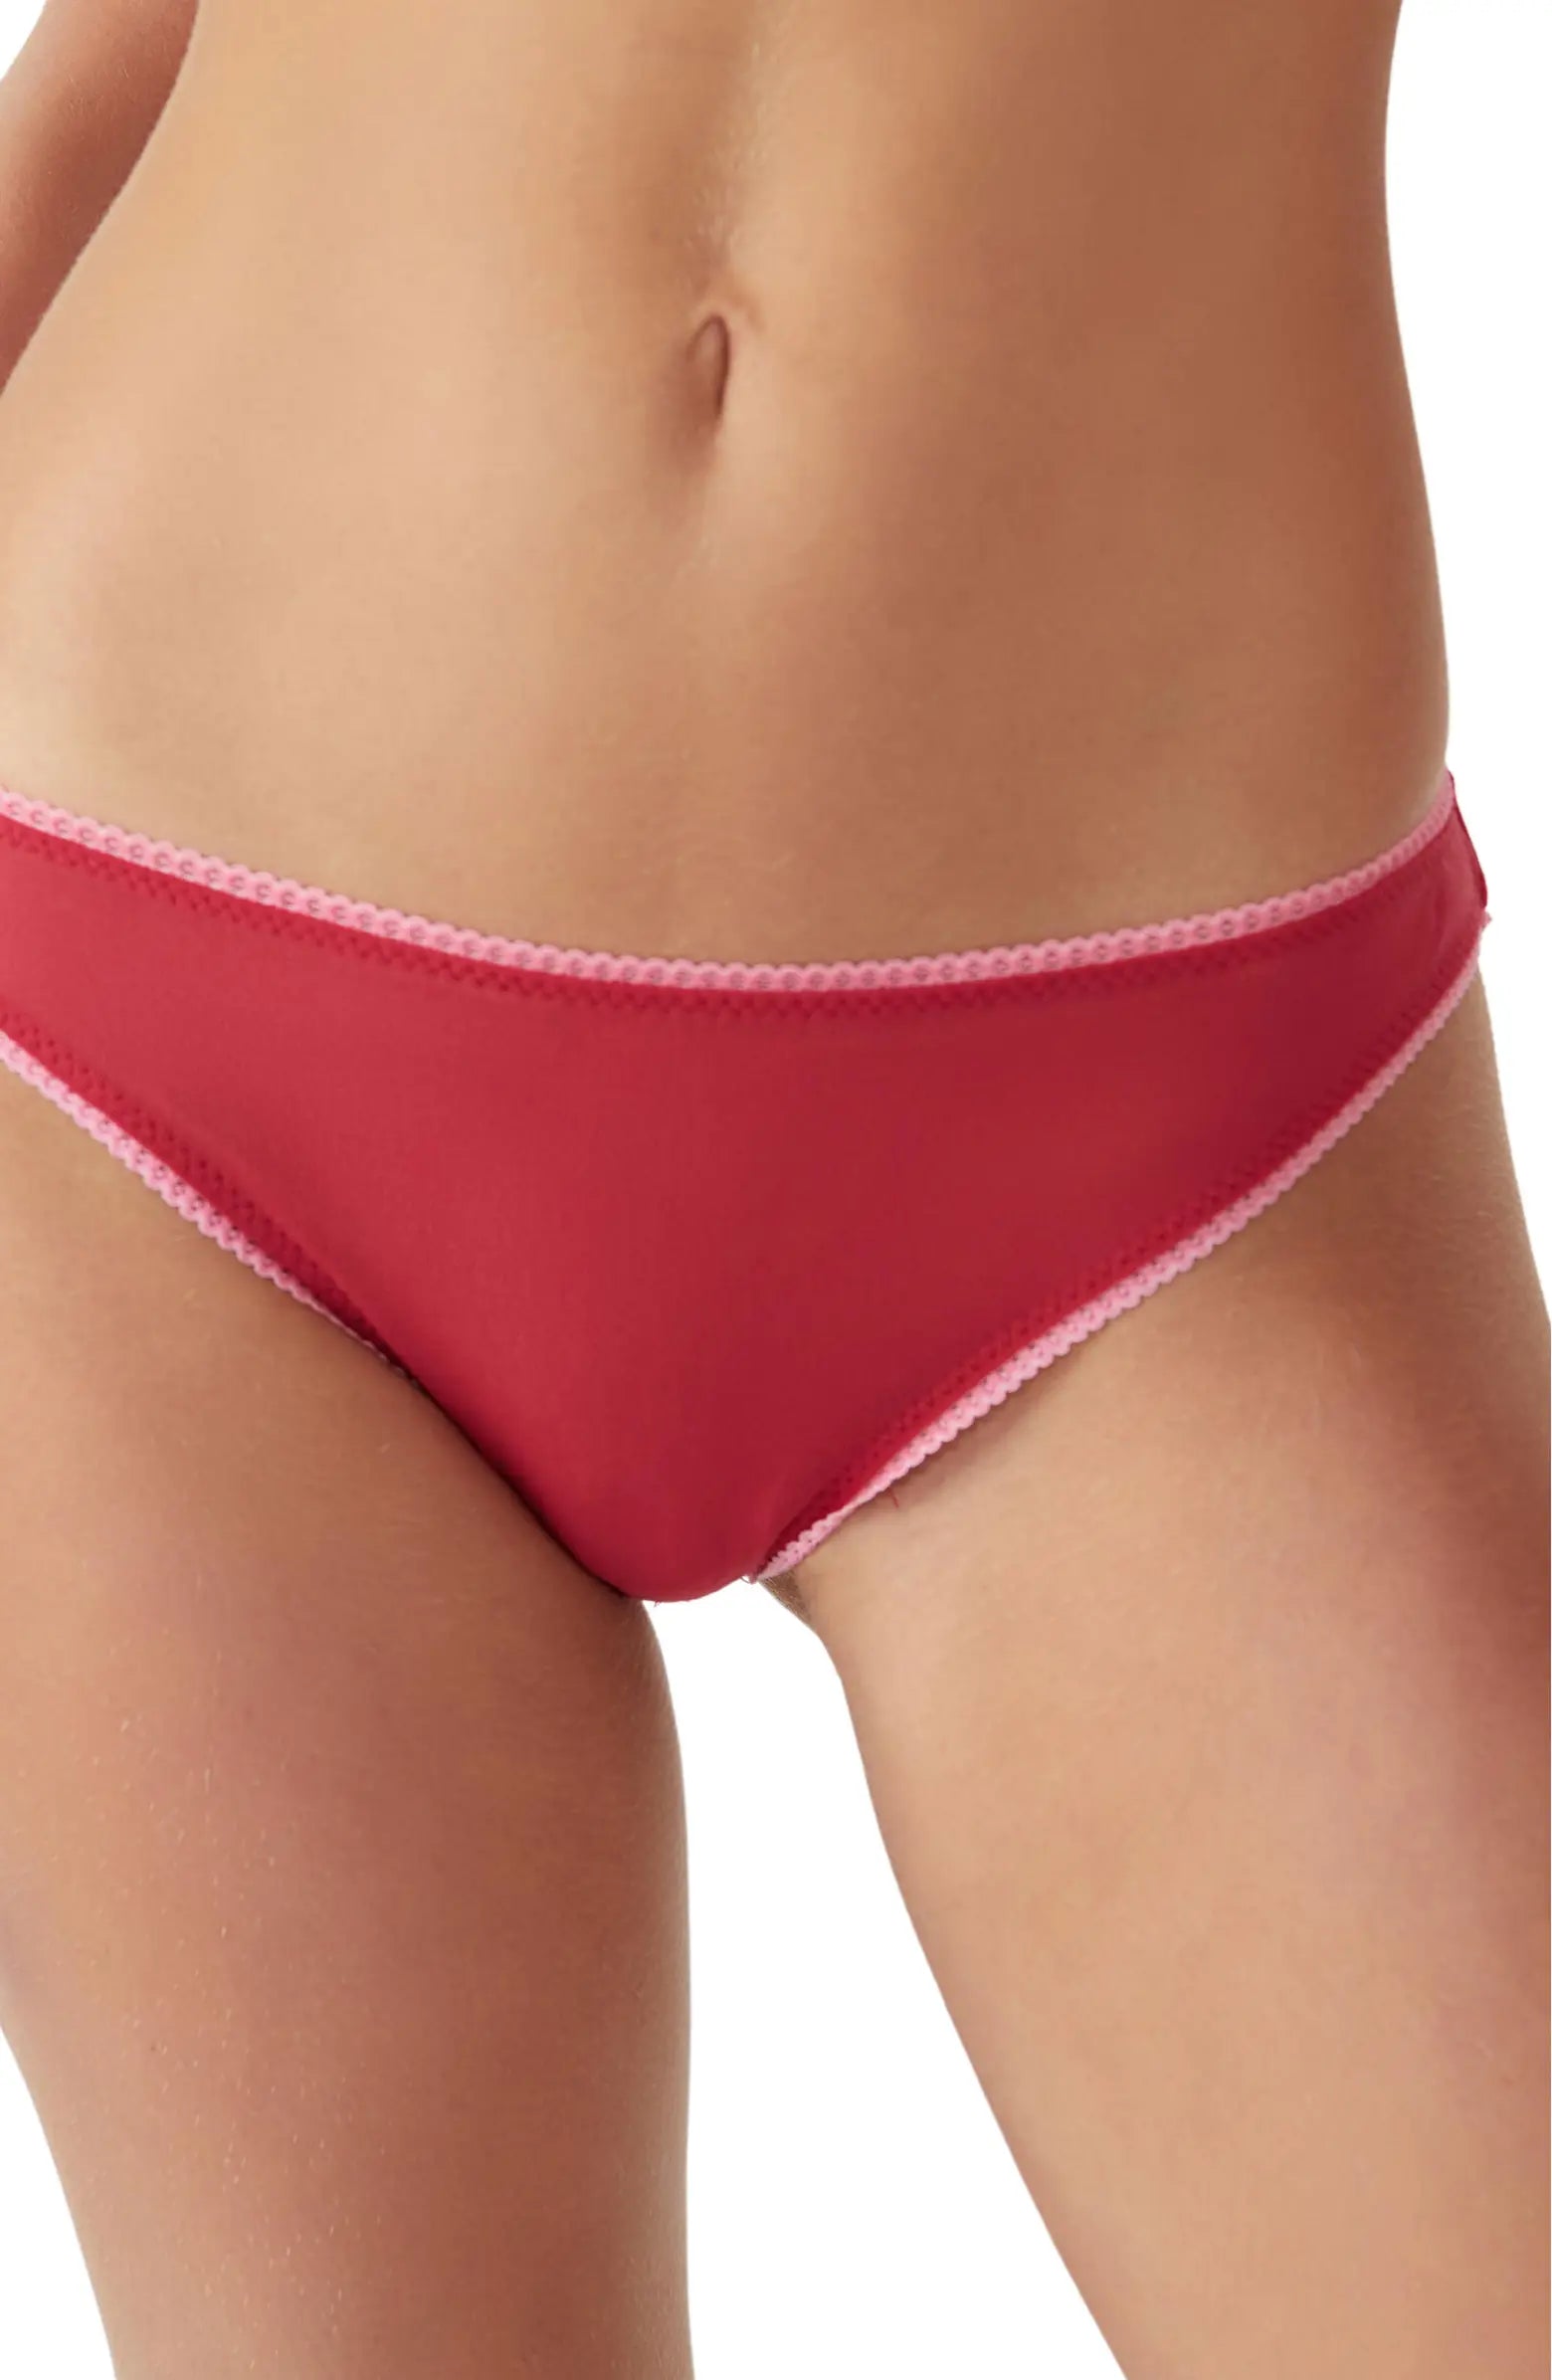 Shop For 2 Women's Low Waist Panty & Get 1 Free